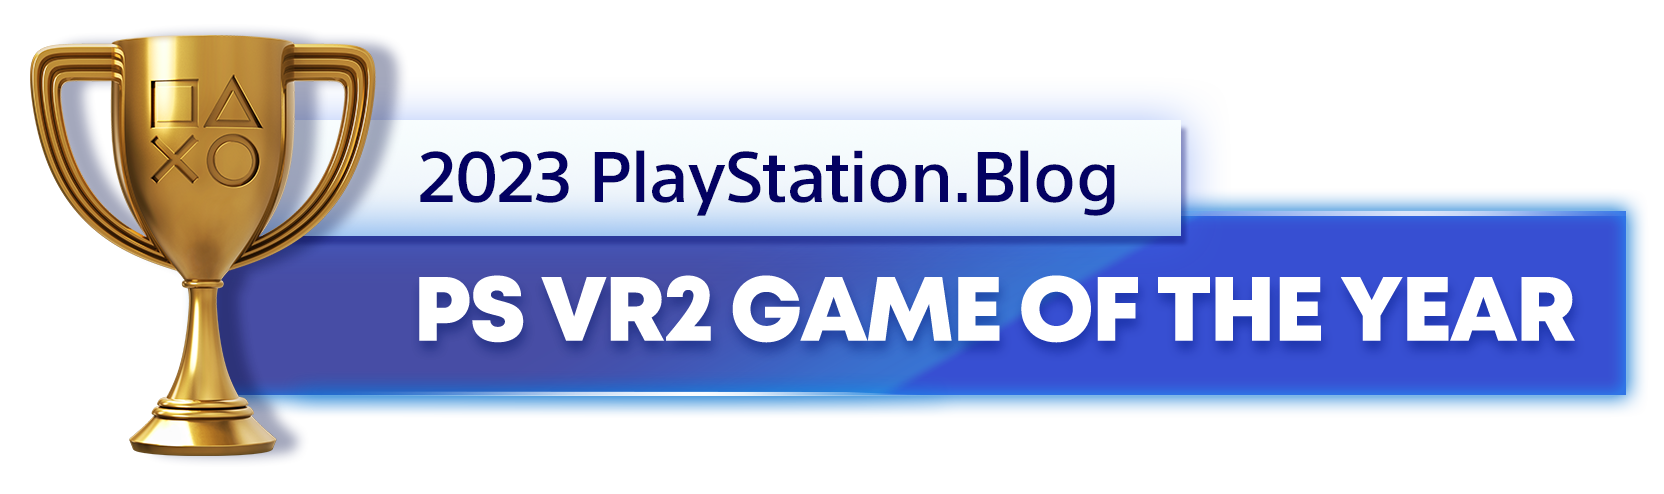  "Gold Trophy for the 2023 PlayStation Blog PS VR2 Game of the Year Winner"